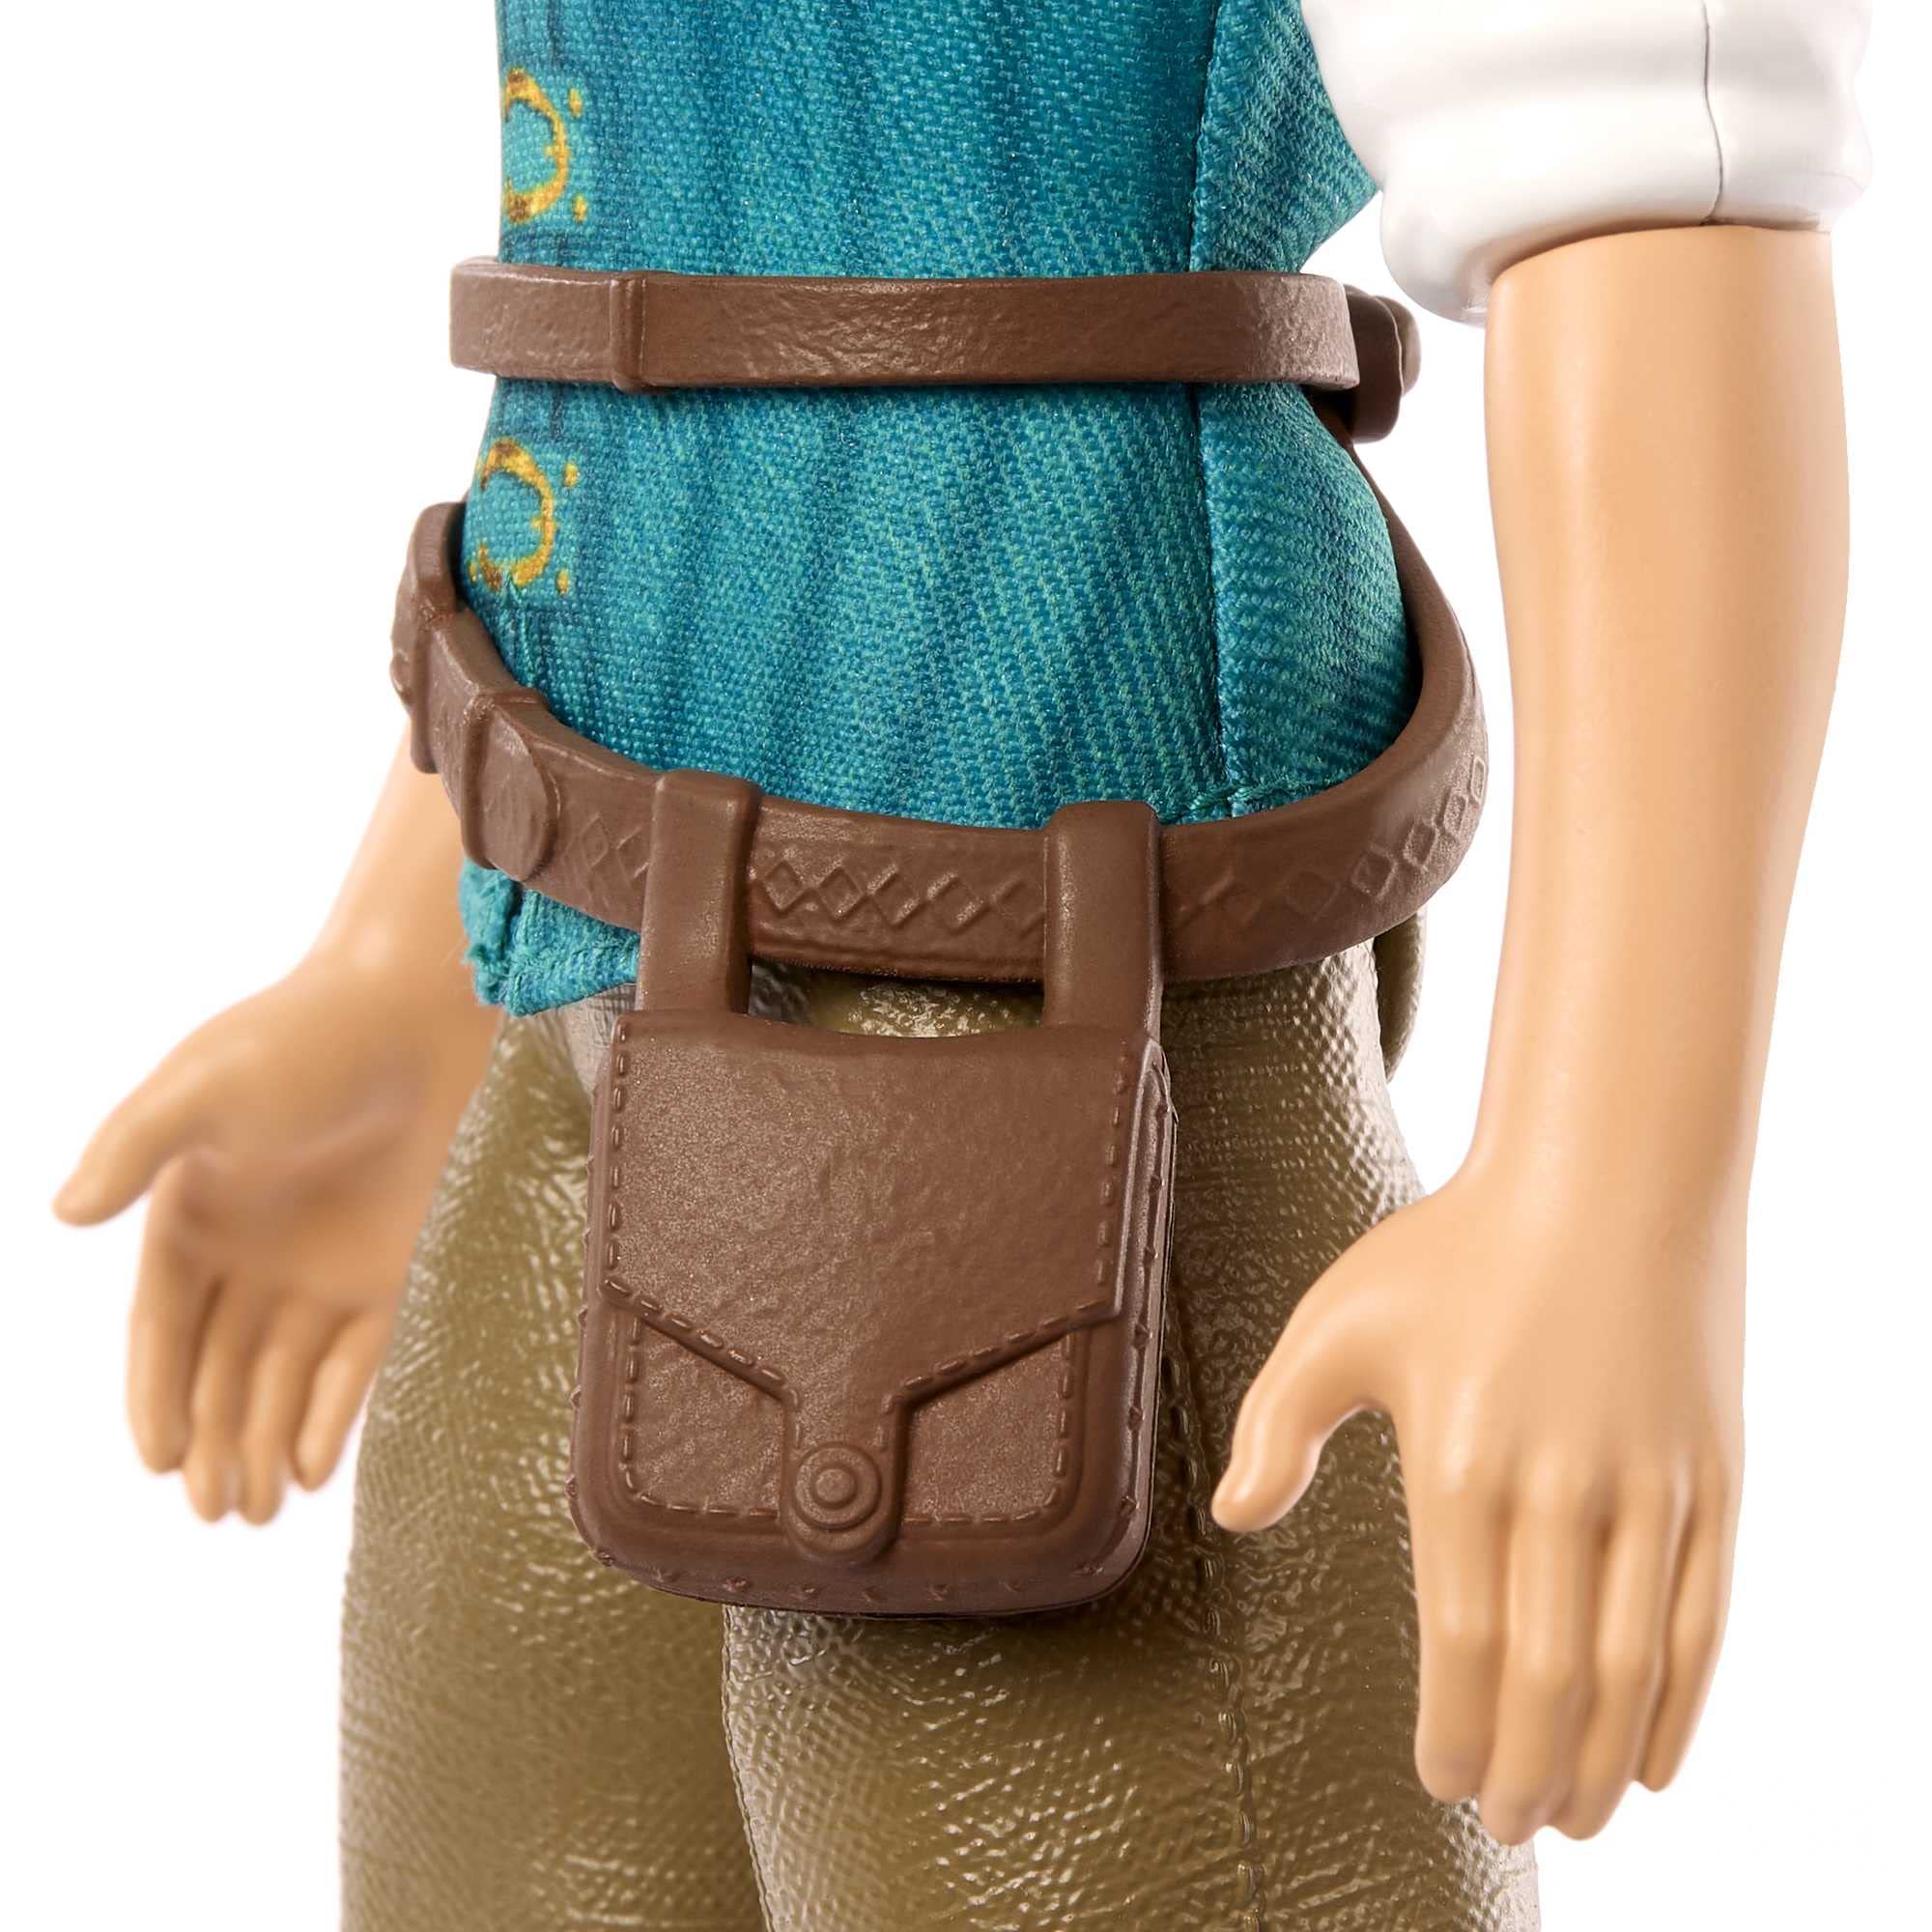 Mattel Disney Princess Flynn Rider Fashion Doll in Hero Outfit from Disney Movie Tangled, Posable